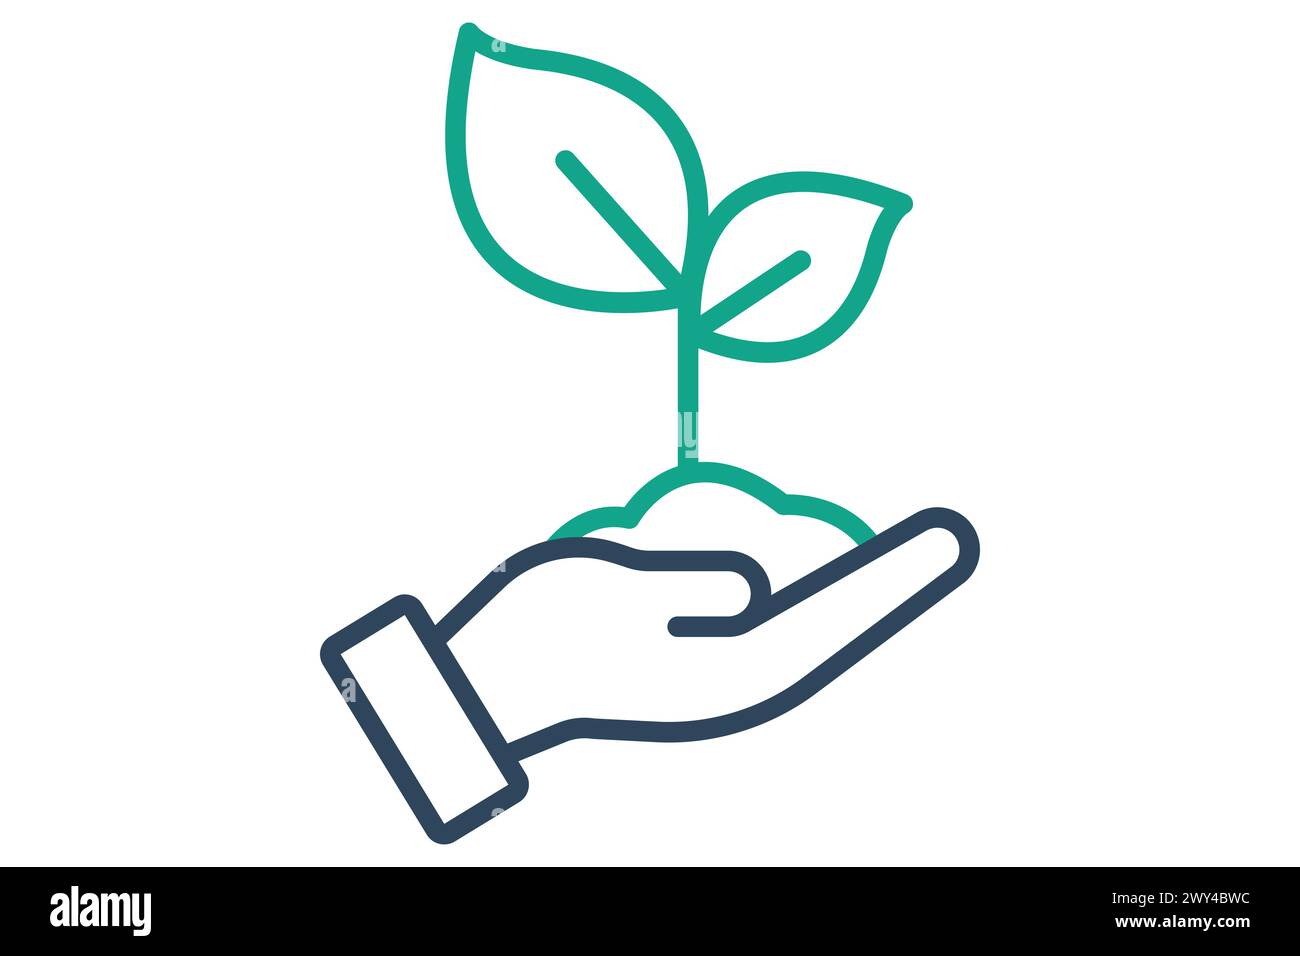 environment icon. hand with plant. icon related to ESG. line icon style. nature element illustration Stock Vector